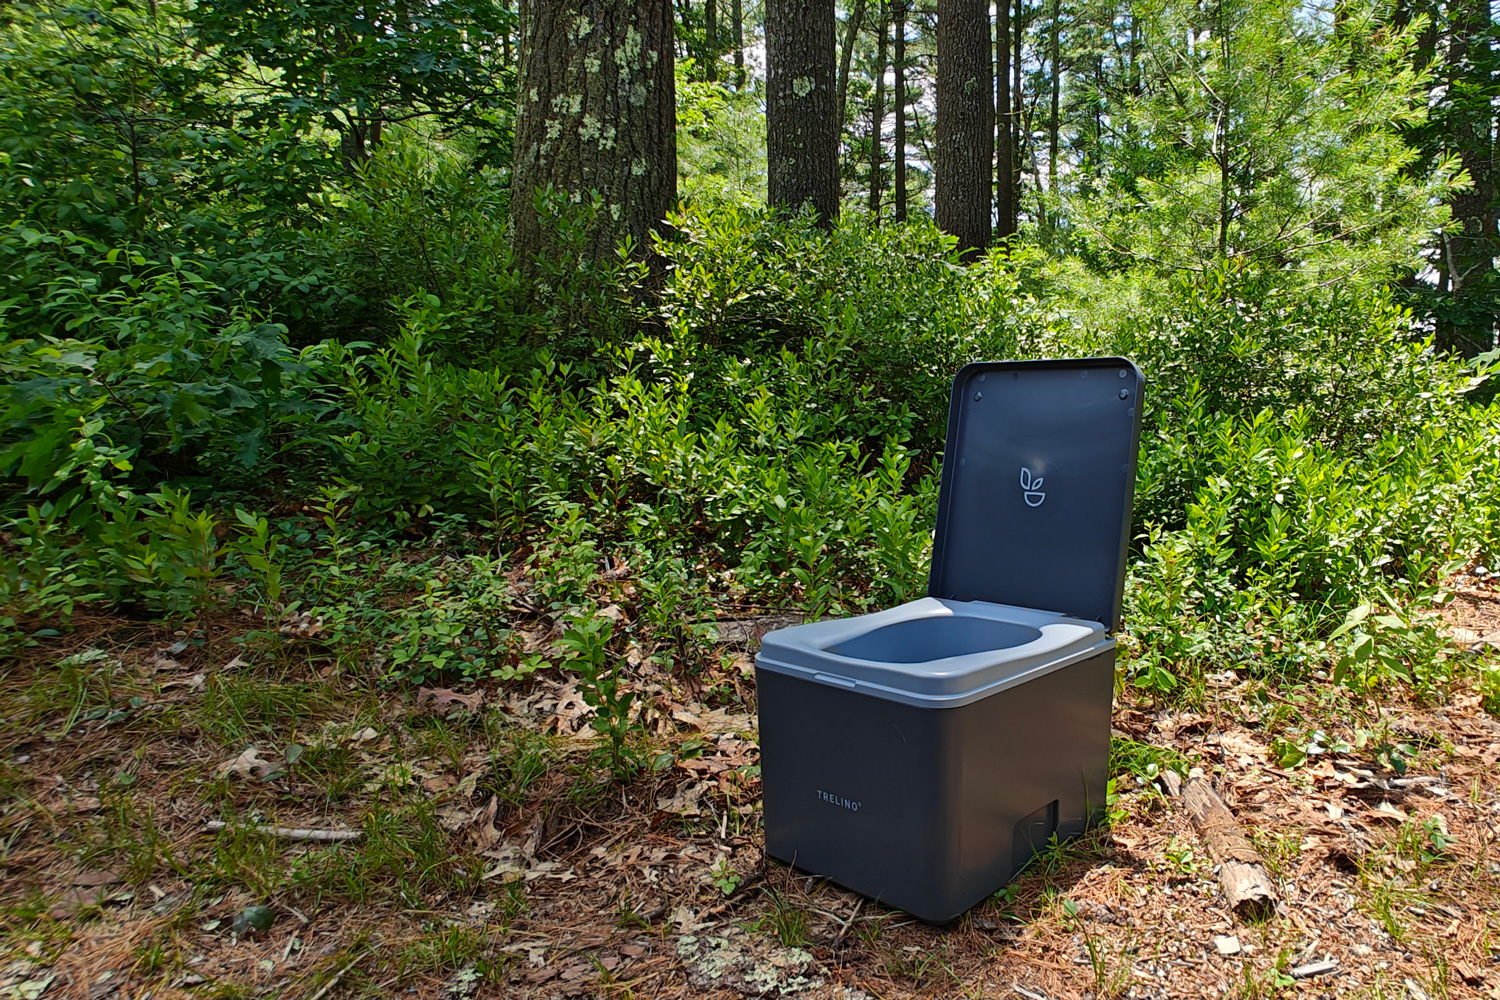 Trelino Composting toilet - Install and review. #Camper #vanlife #rv 